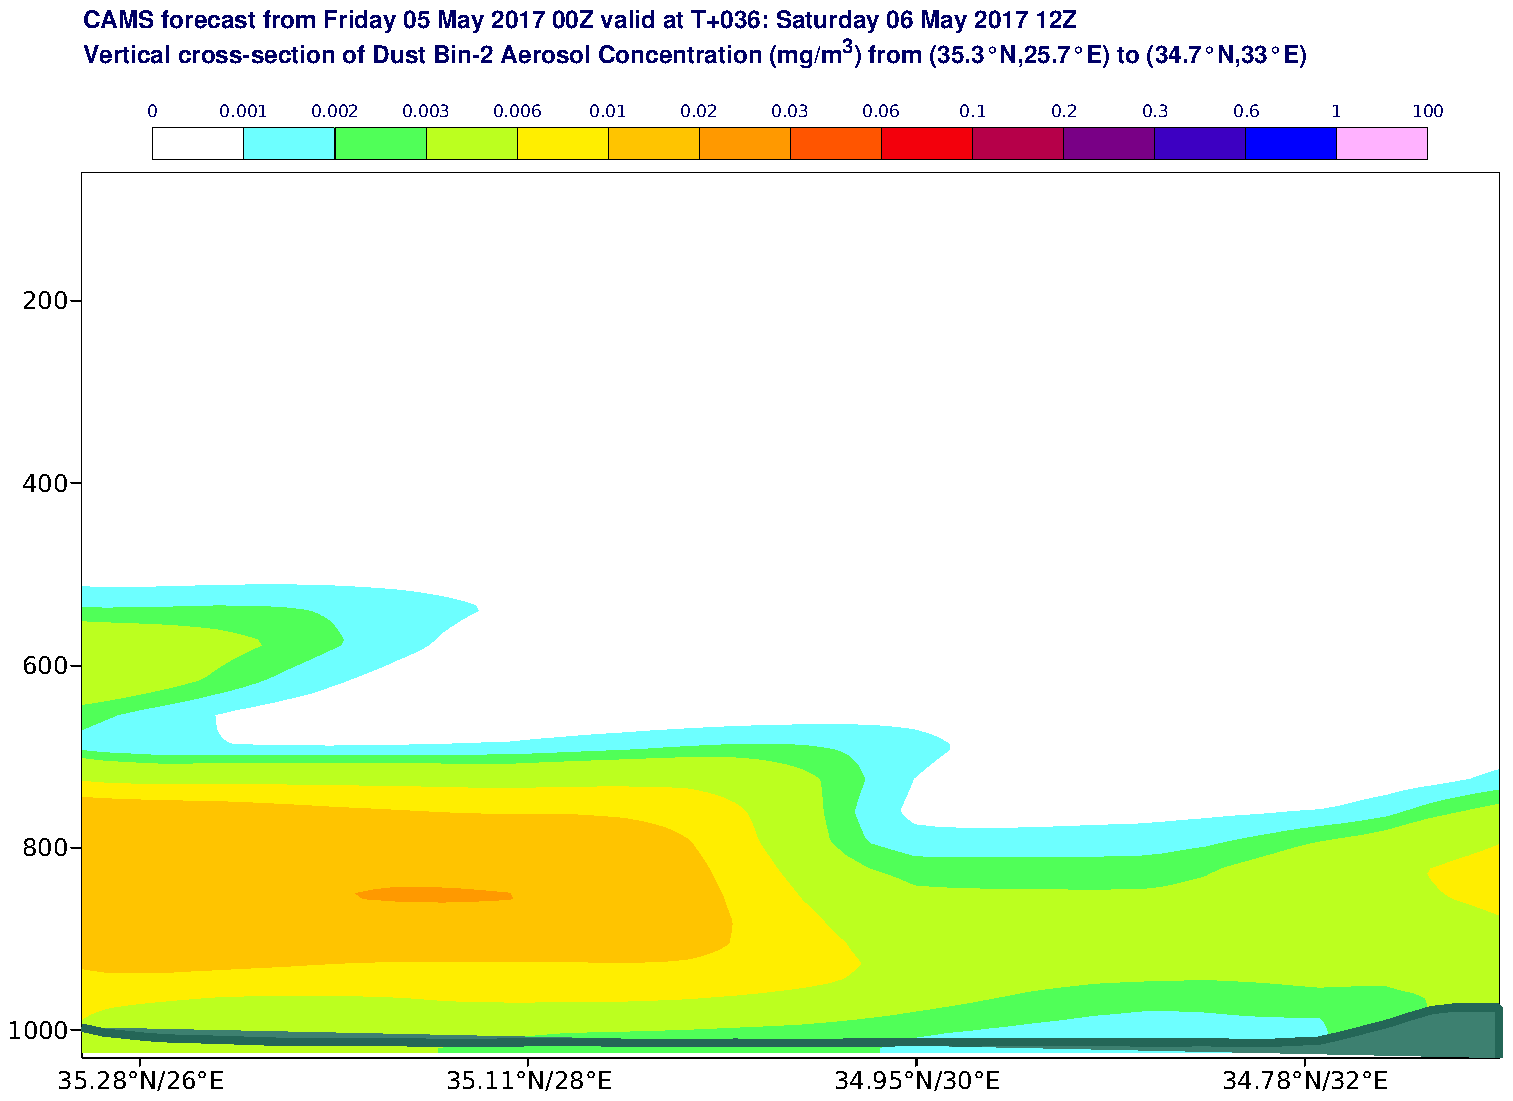 Vertical cross-section of Dust Bin-2 Aerosol Concentration (mg/m3) valid at T36 - 2017-05-06 12:00